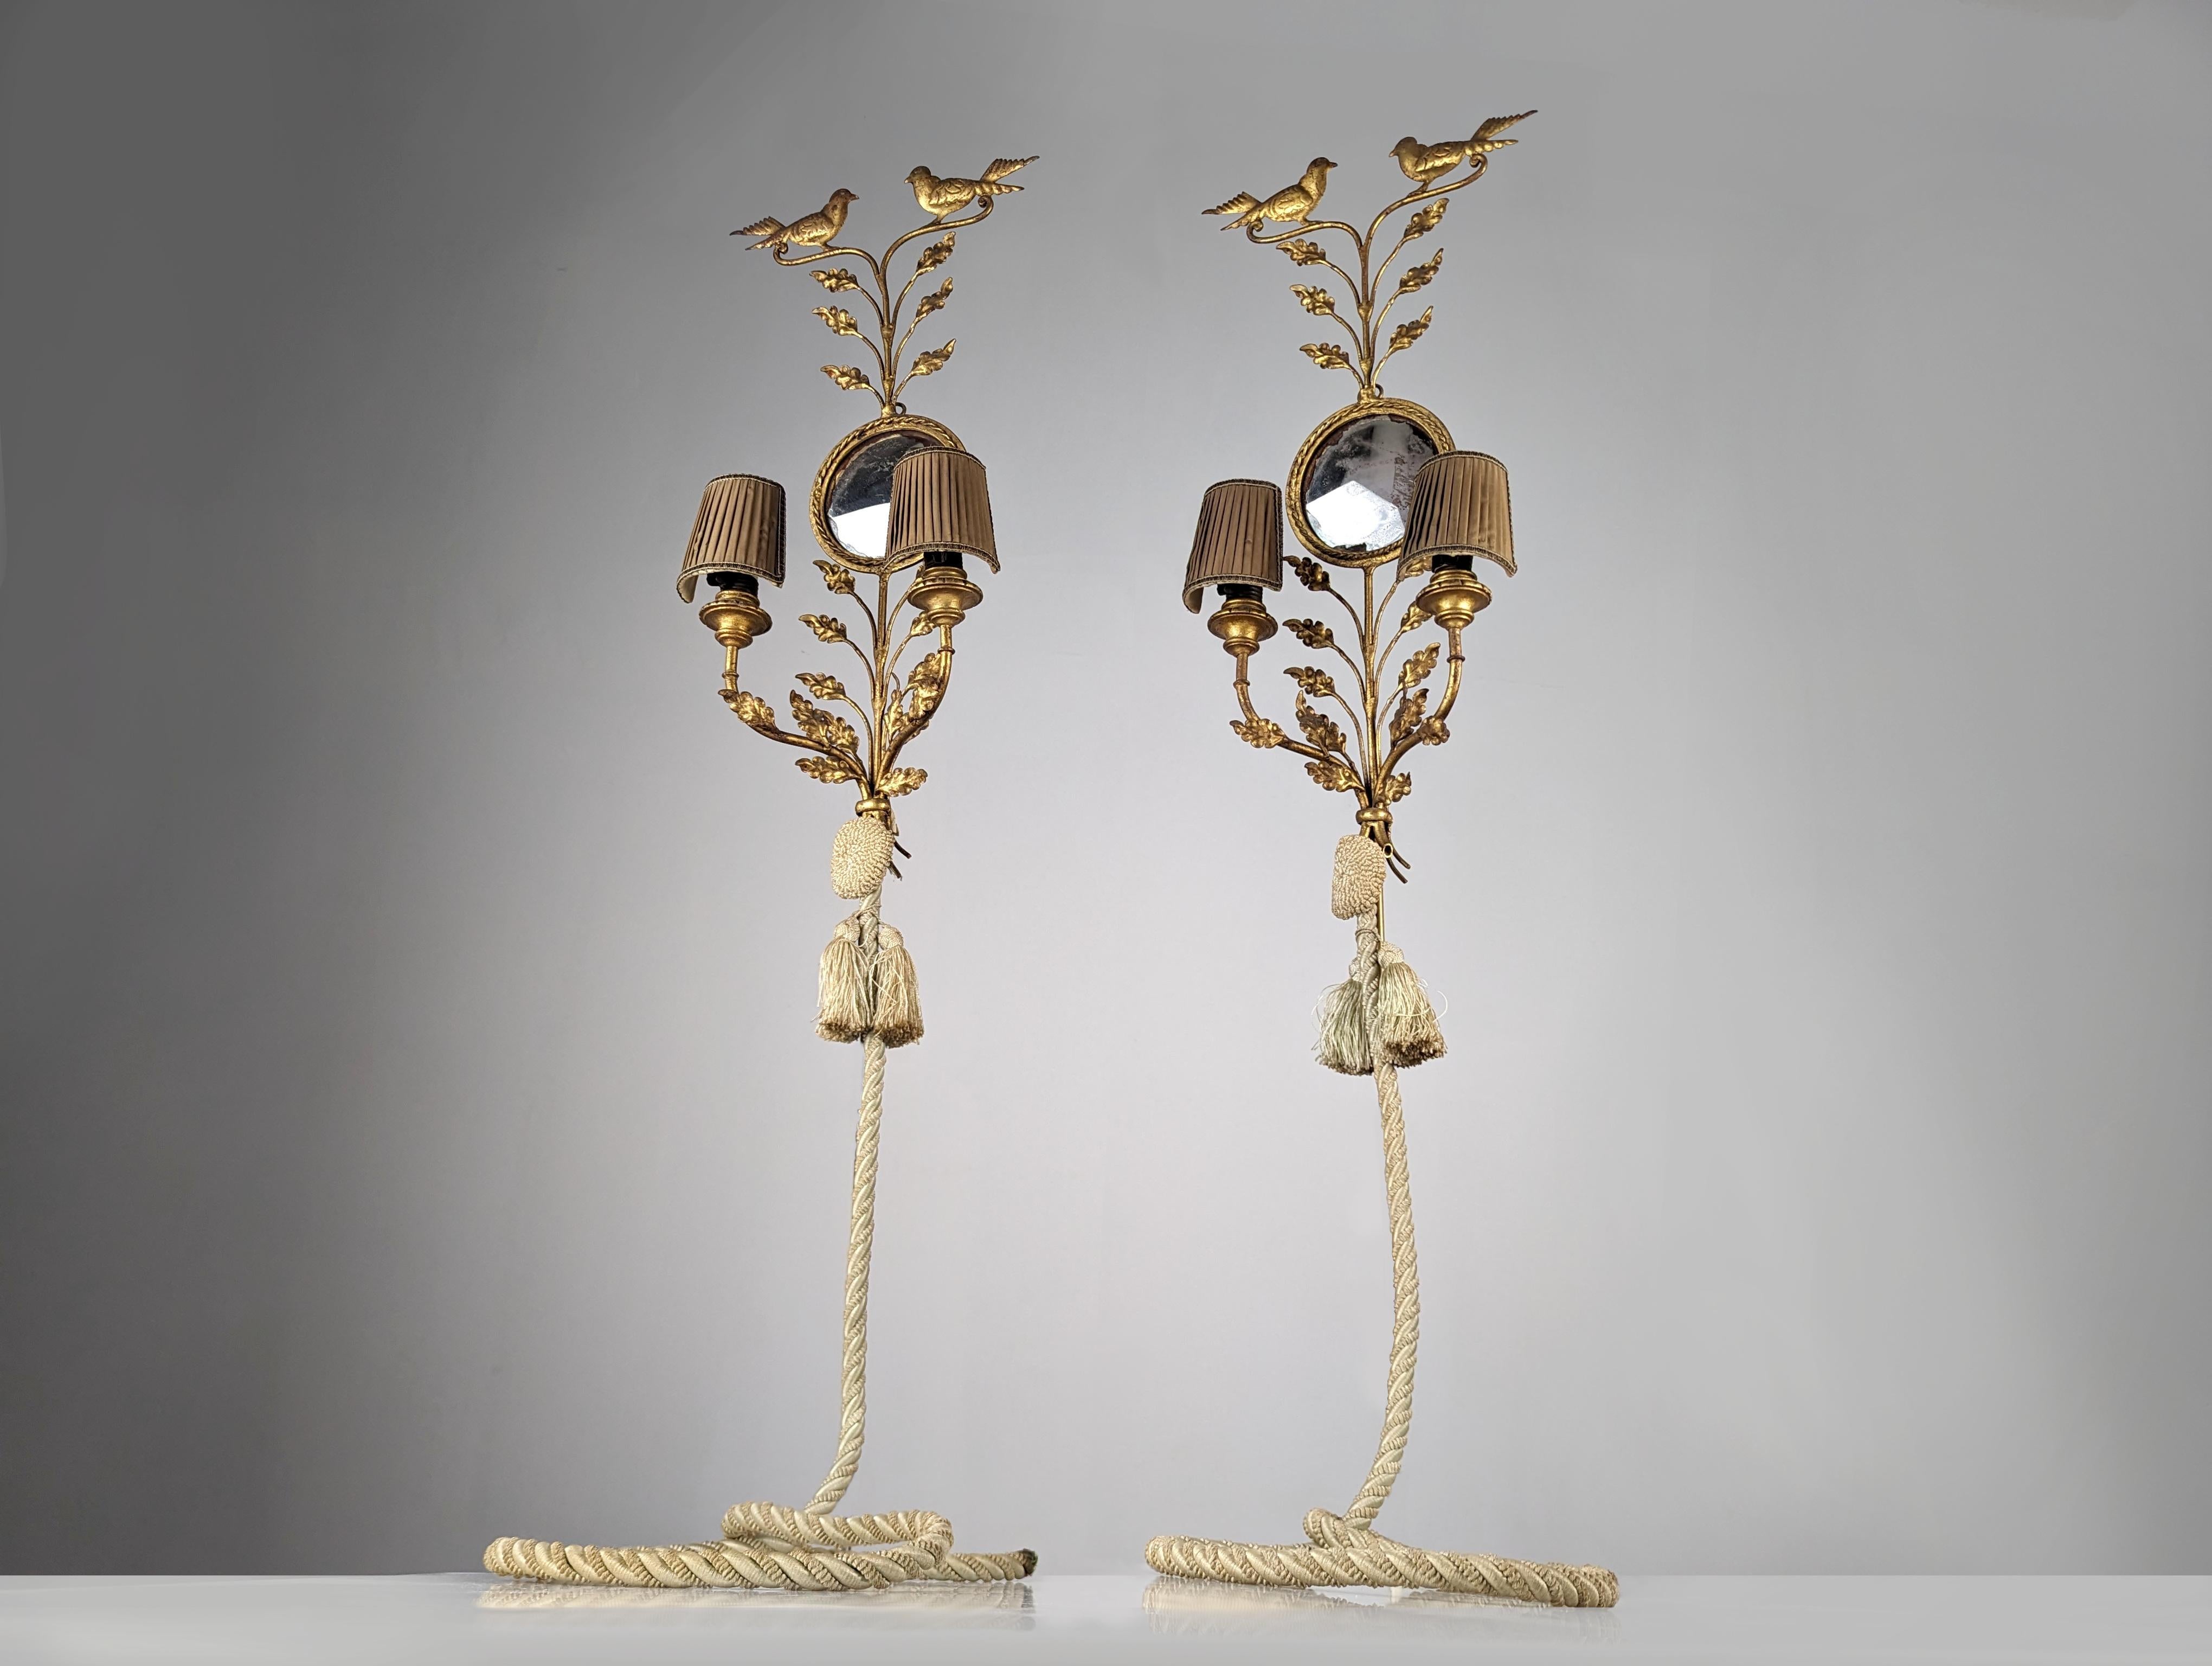 Pair of large gilded iron wall lights with a beautiful shape of branches full of oak leaves on which two beautiful birds perch in their highest part that seem to sing. In the center, a round mirror with a beautiful original patina creates a